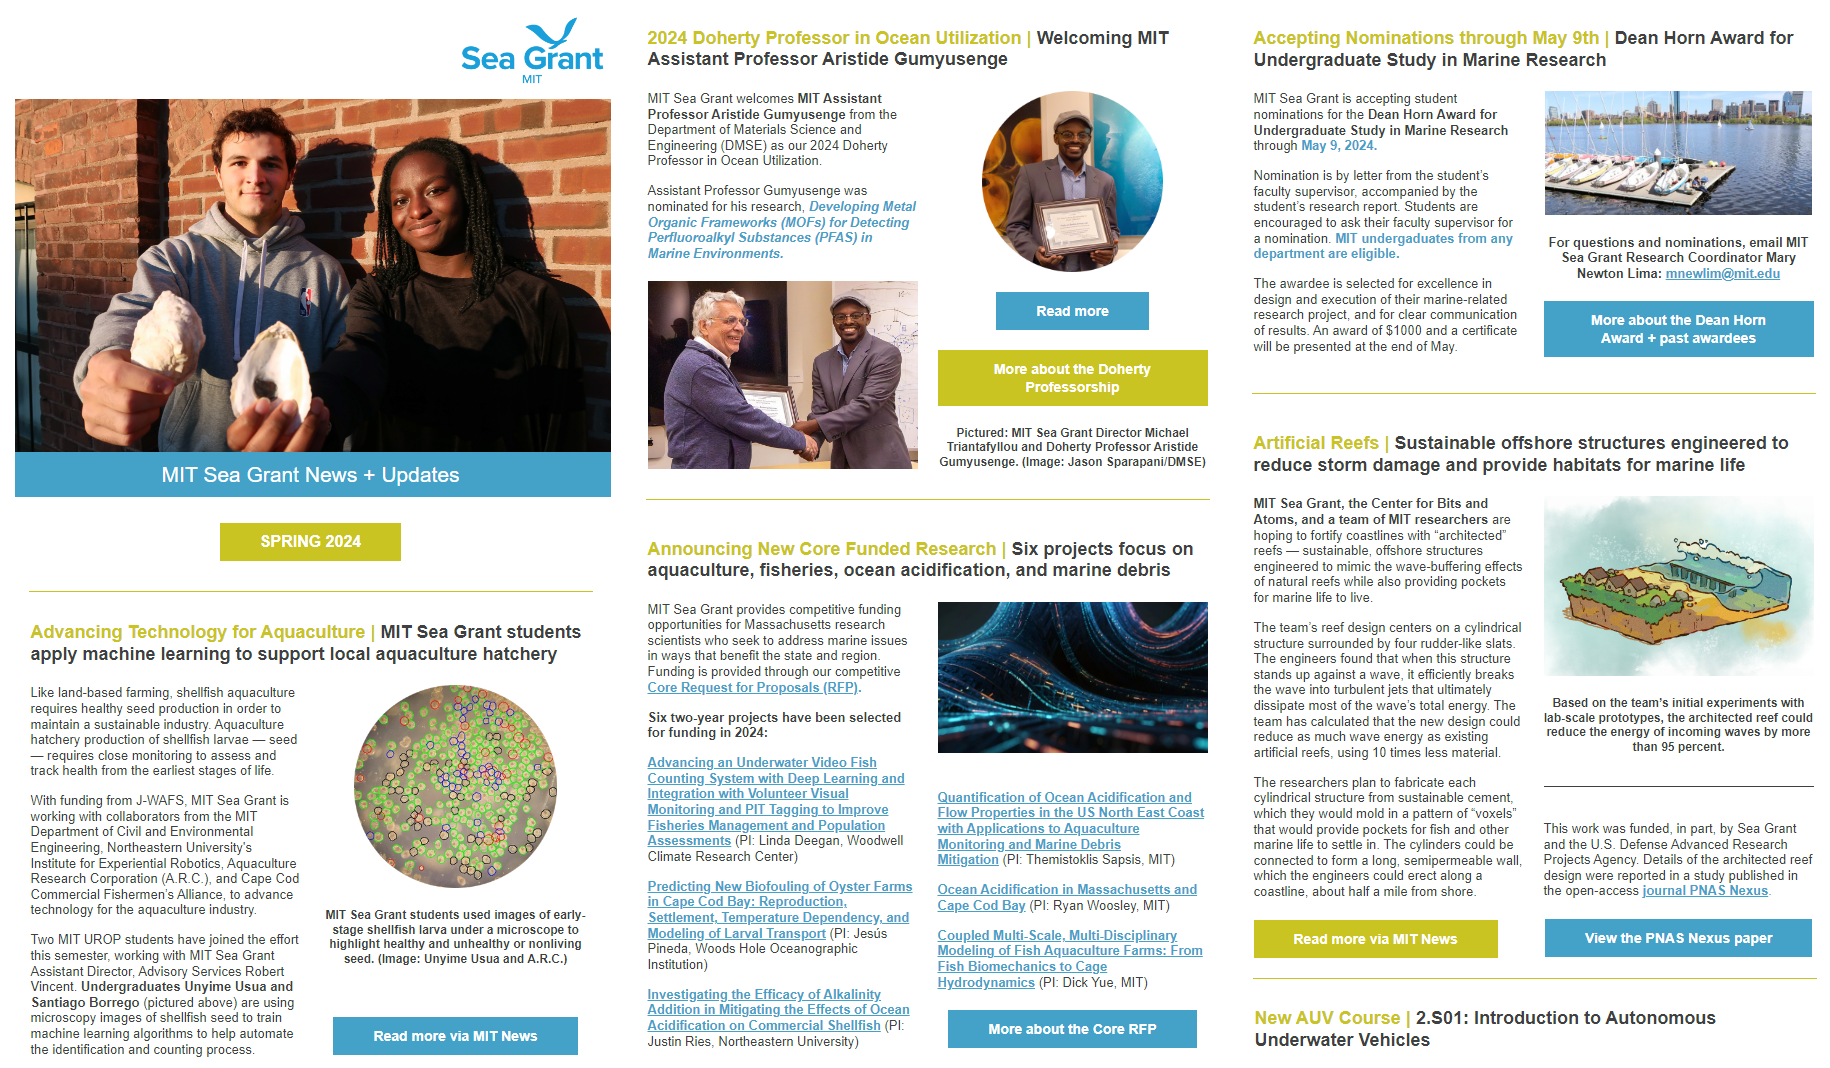 Preview of MIT Sea Grant Spring Newsletter featuring funded research and updates